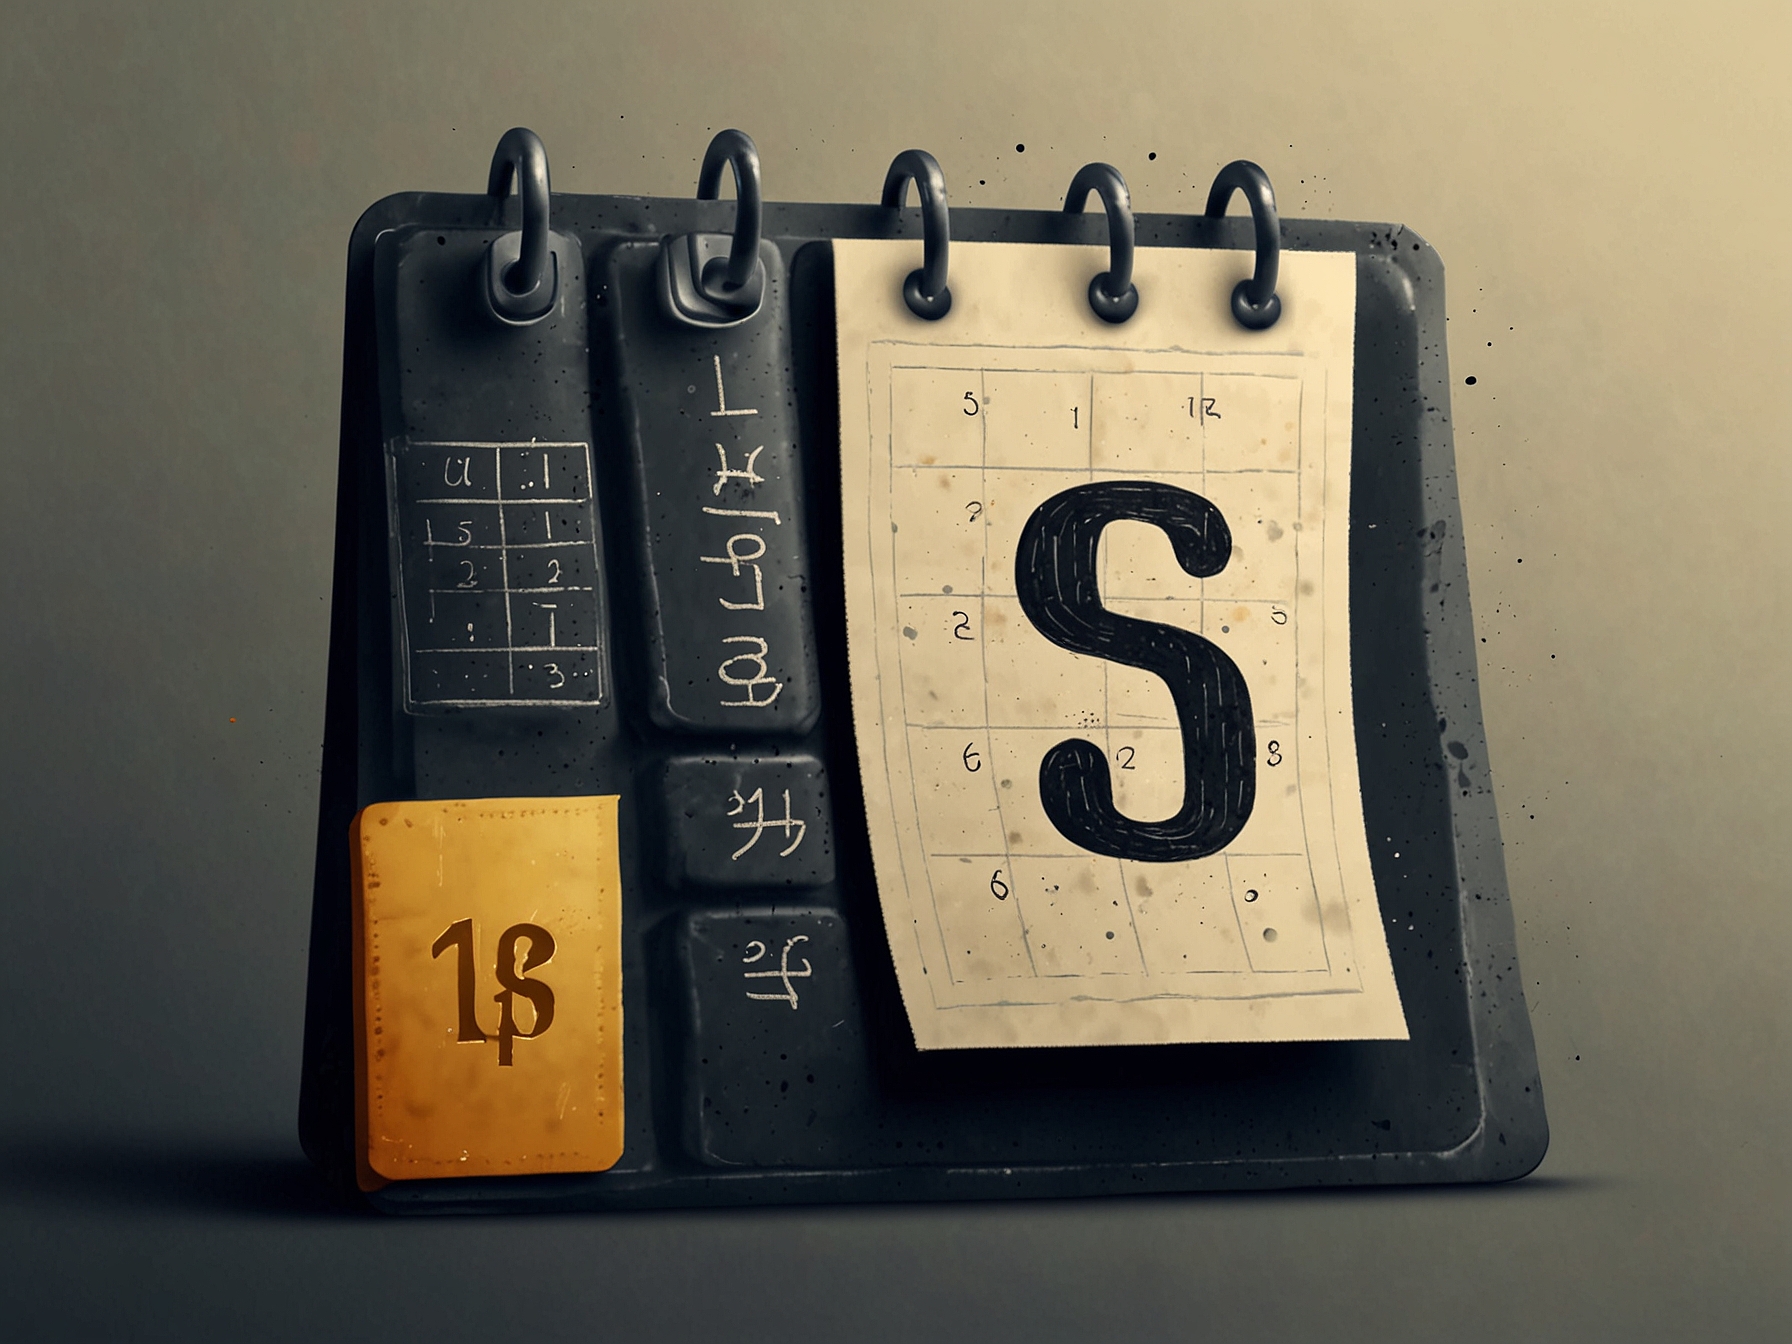 An illustration of a calendar with a dollar sign, symbolizing the concept of installment payments. This represents Apple’s strategy to integrate financial tools directly into its operating system in iOS 18.